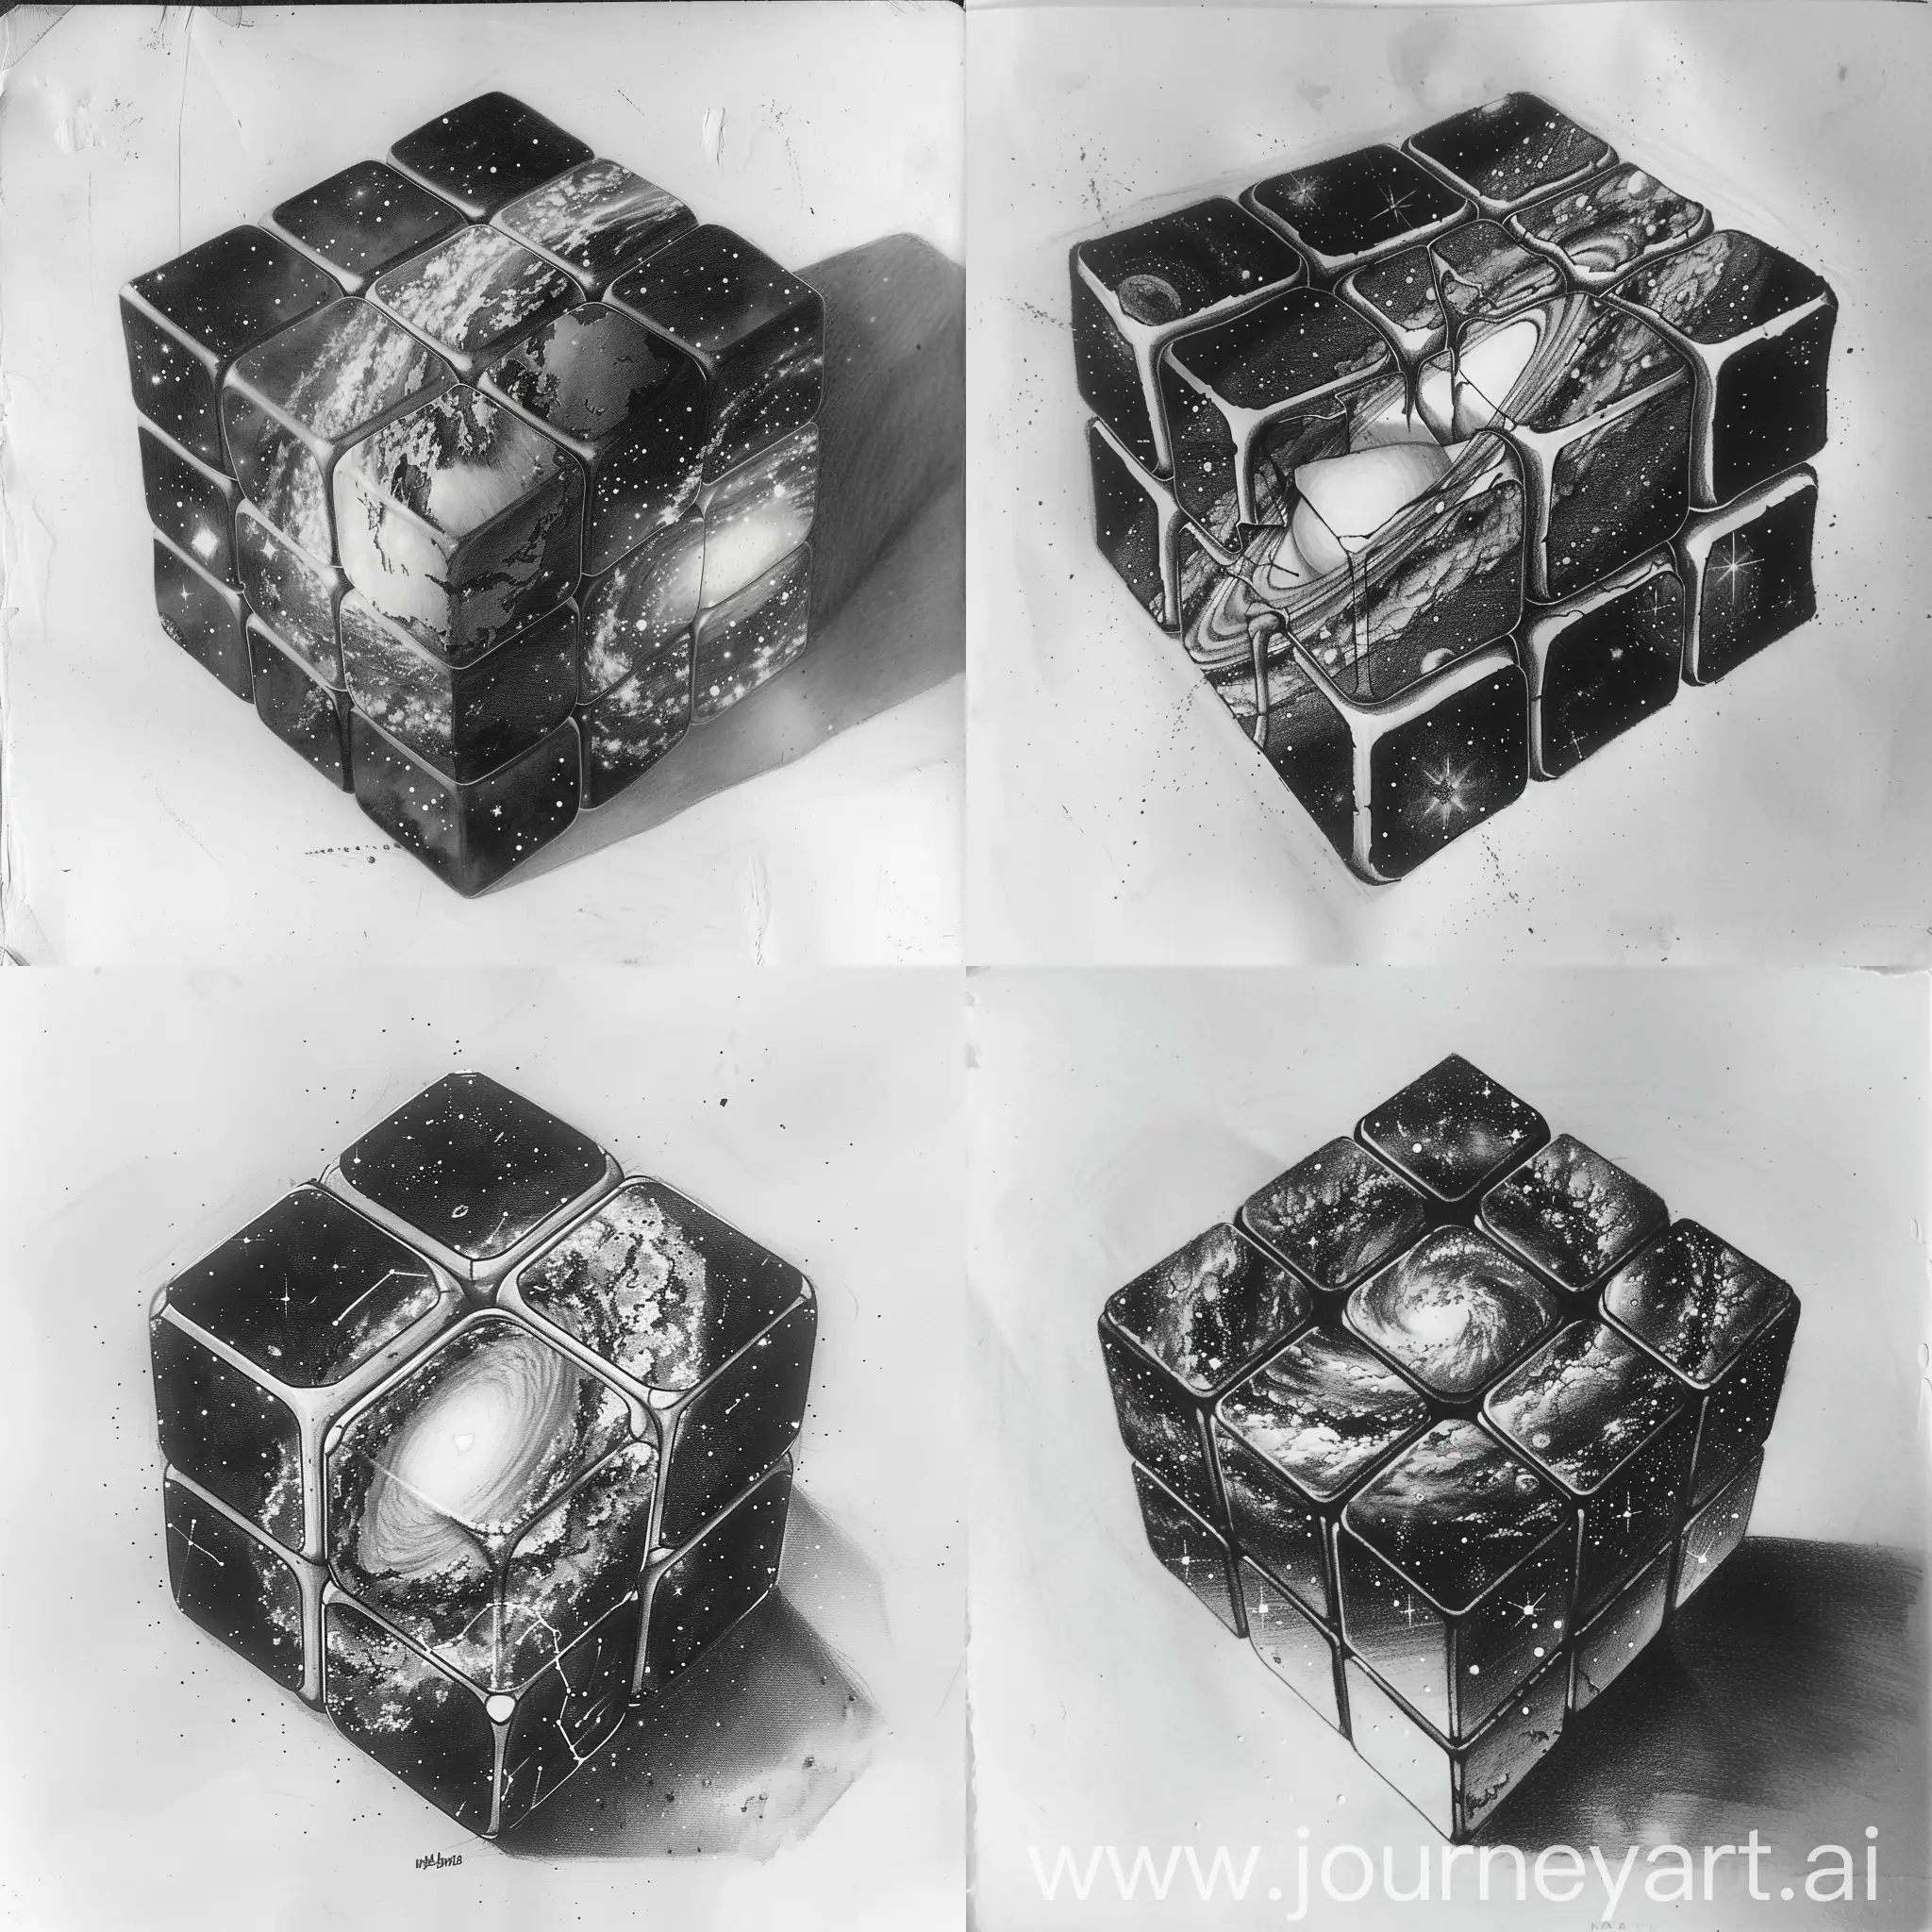 Monochrome-Pencil-Drawing-of-Galactic-Rubiks-Cube-Space-System